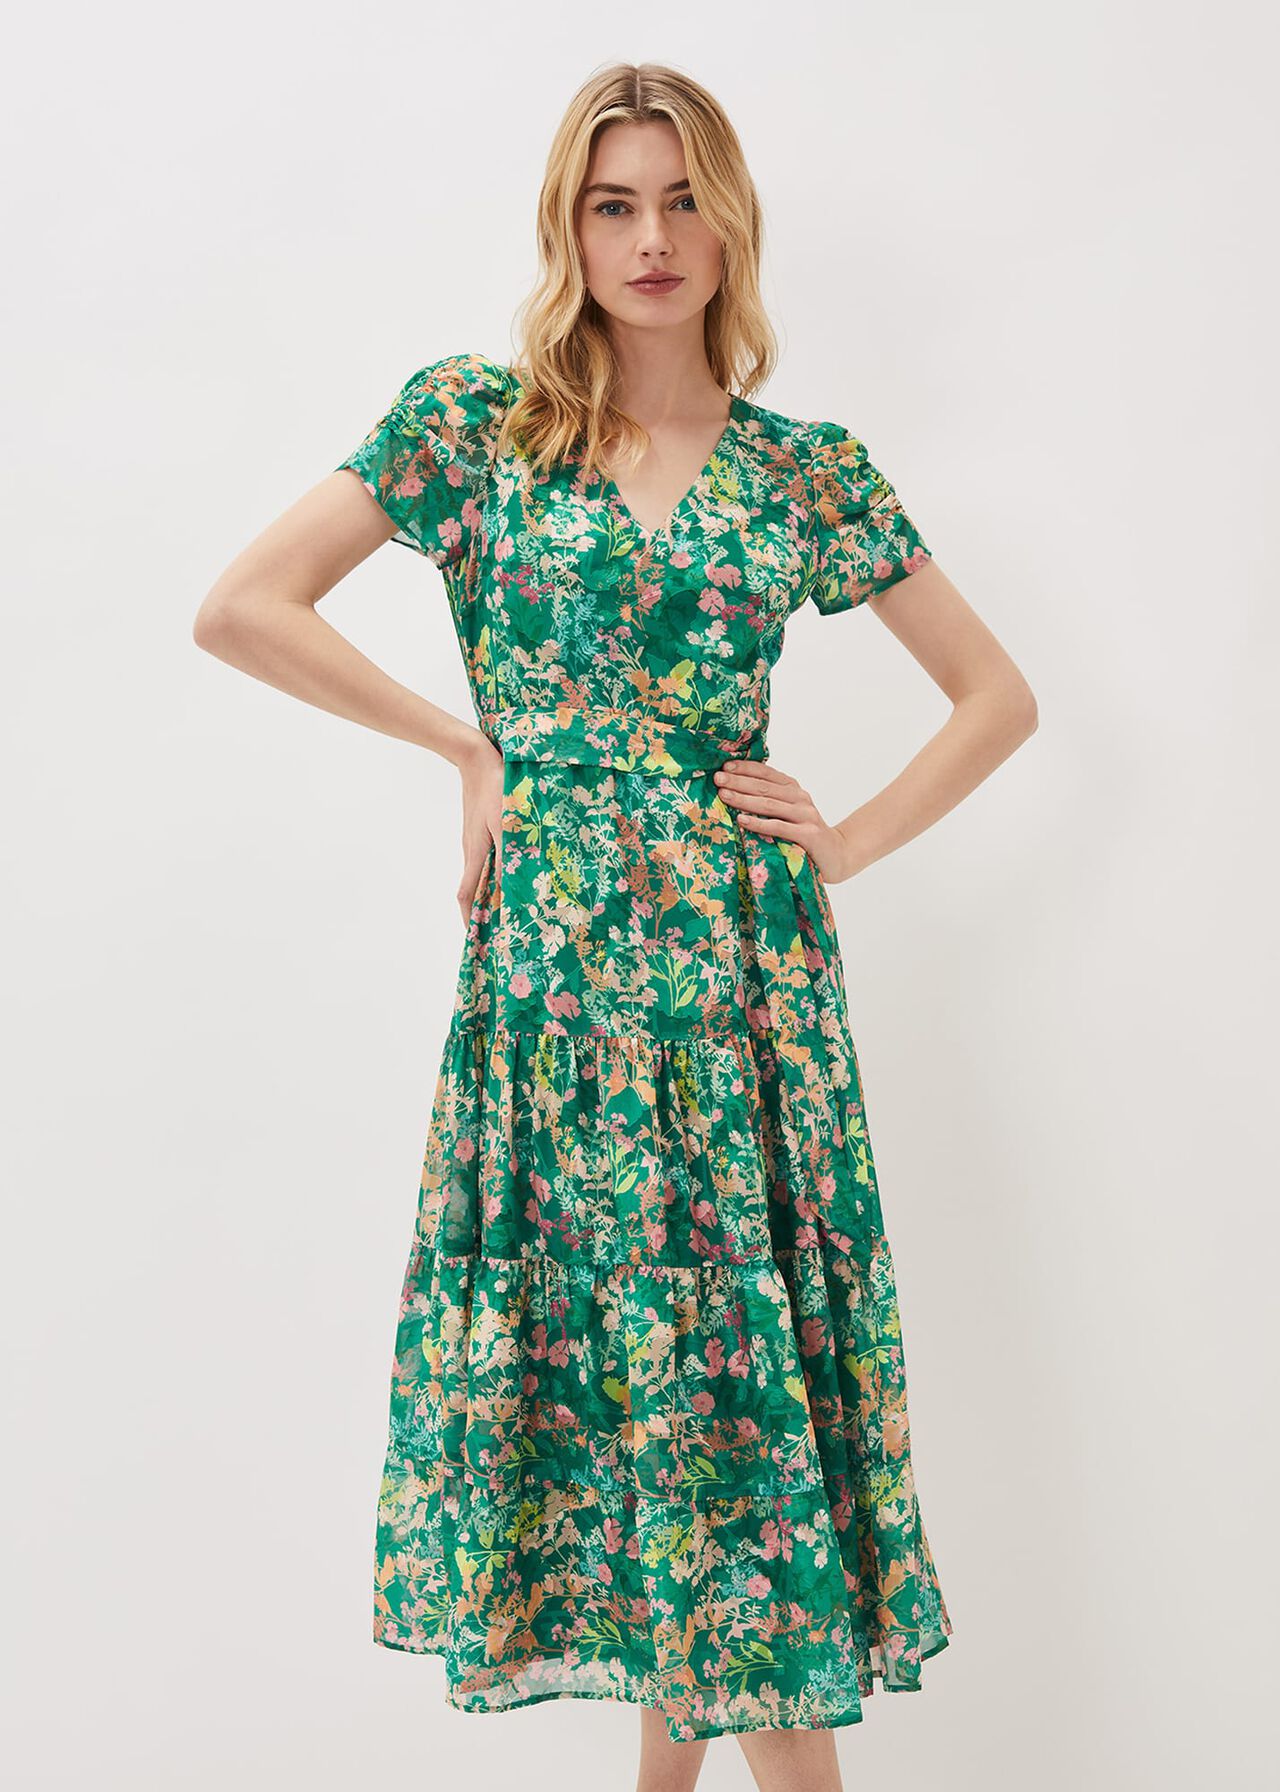 Morven Printed Tiered Dress | Phase Eight